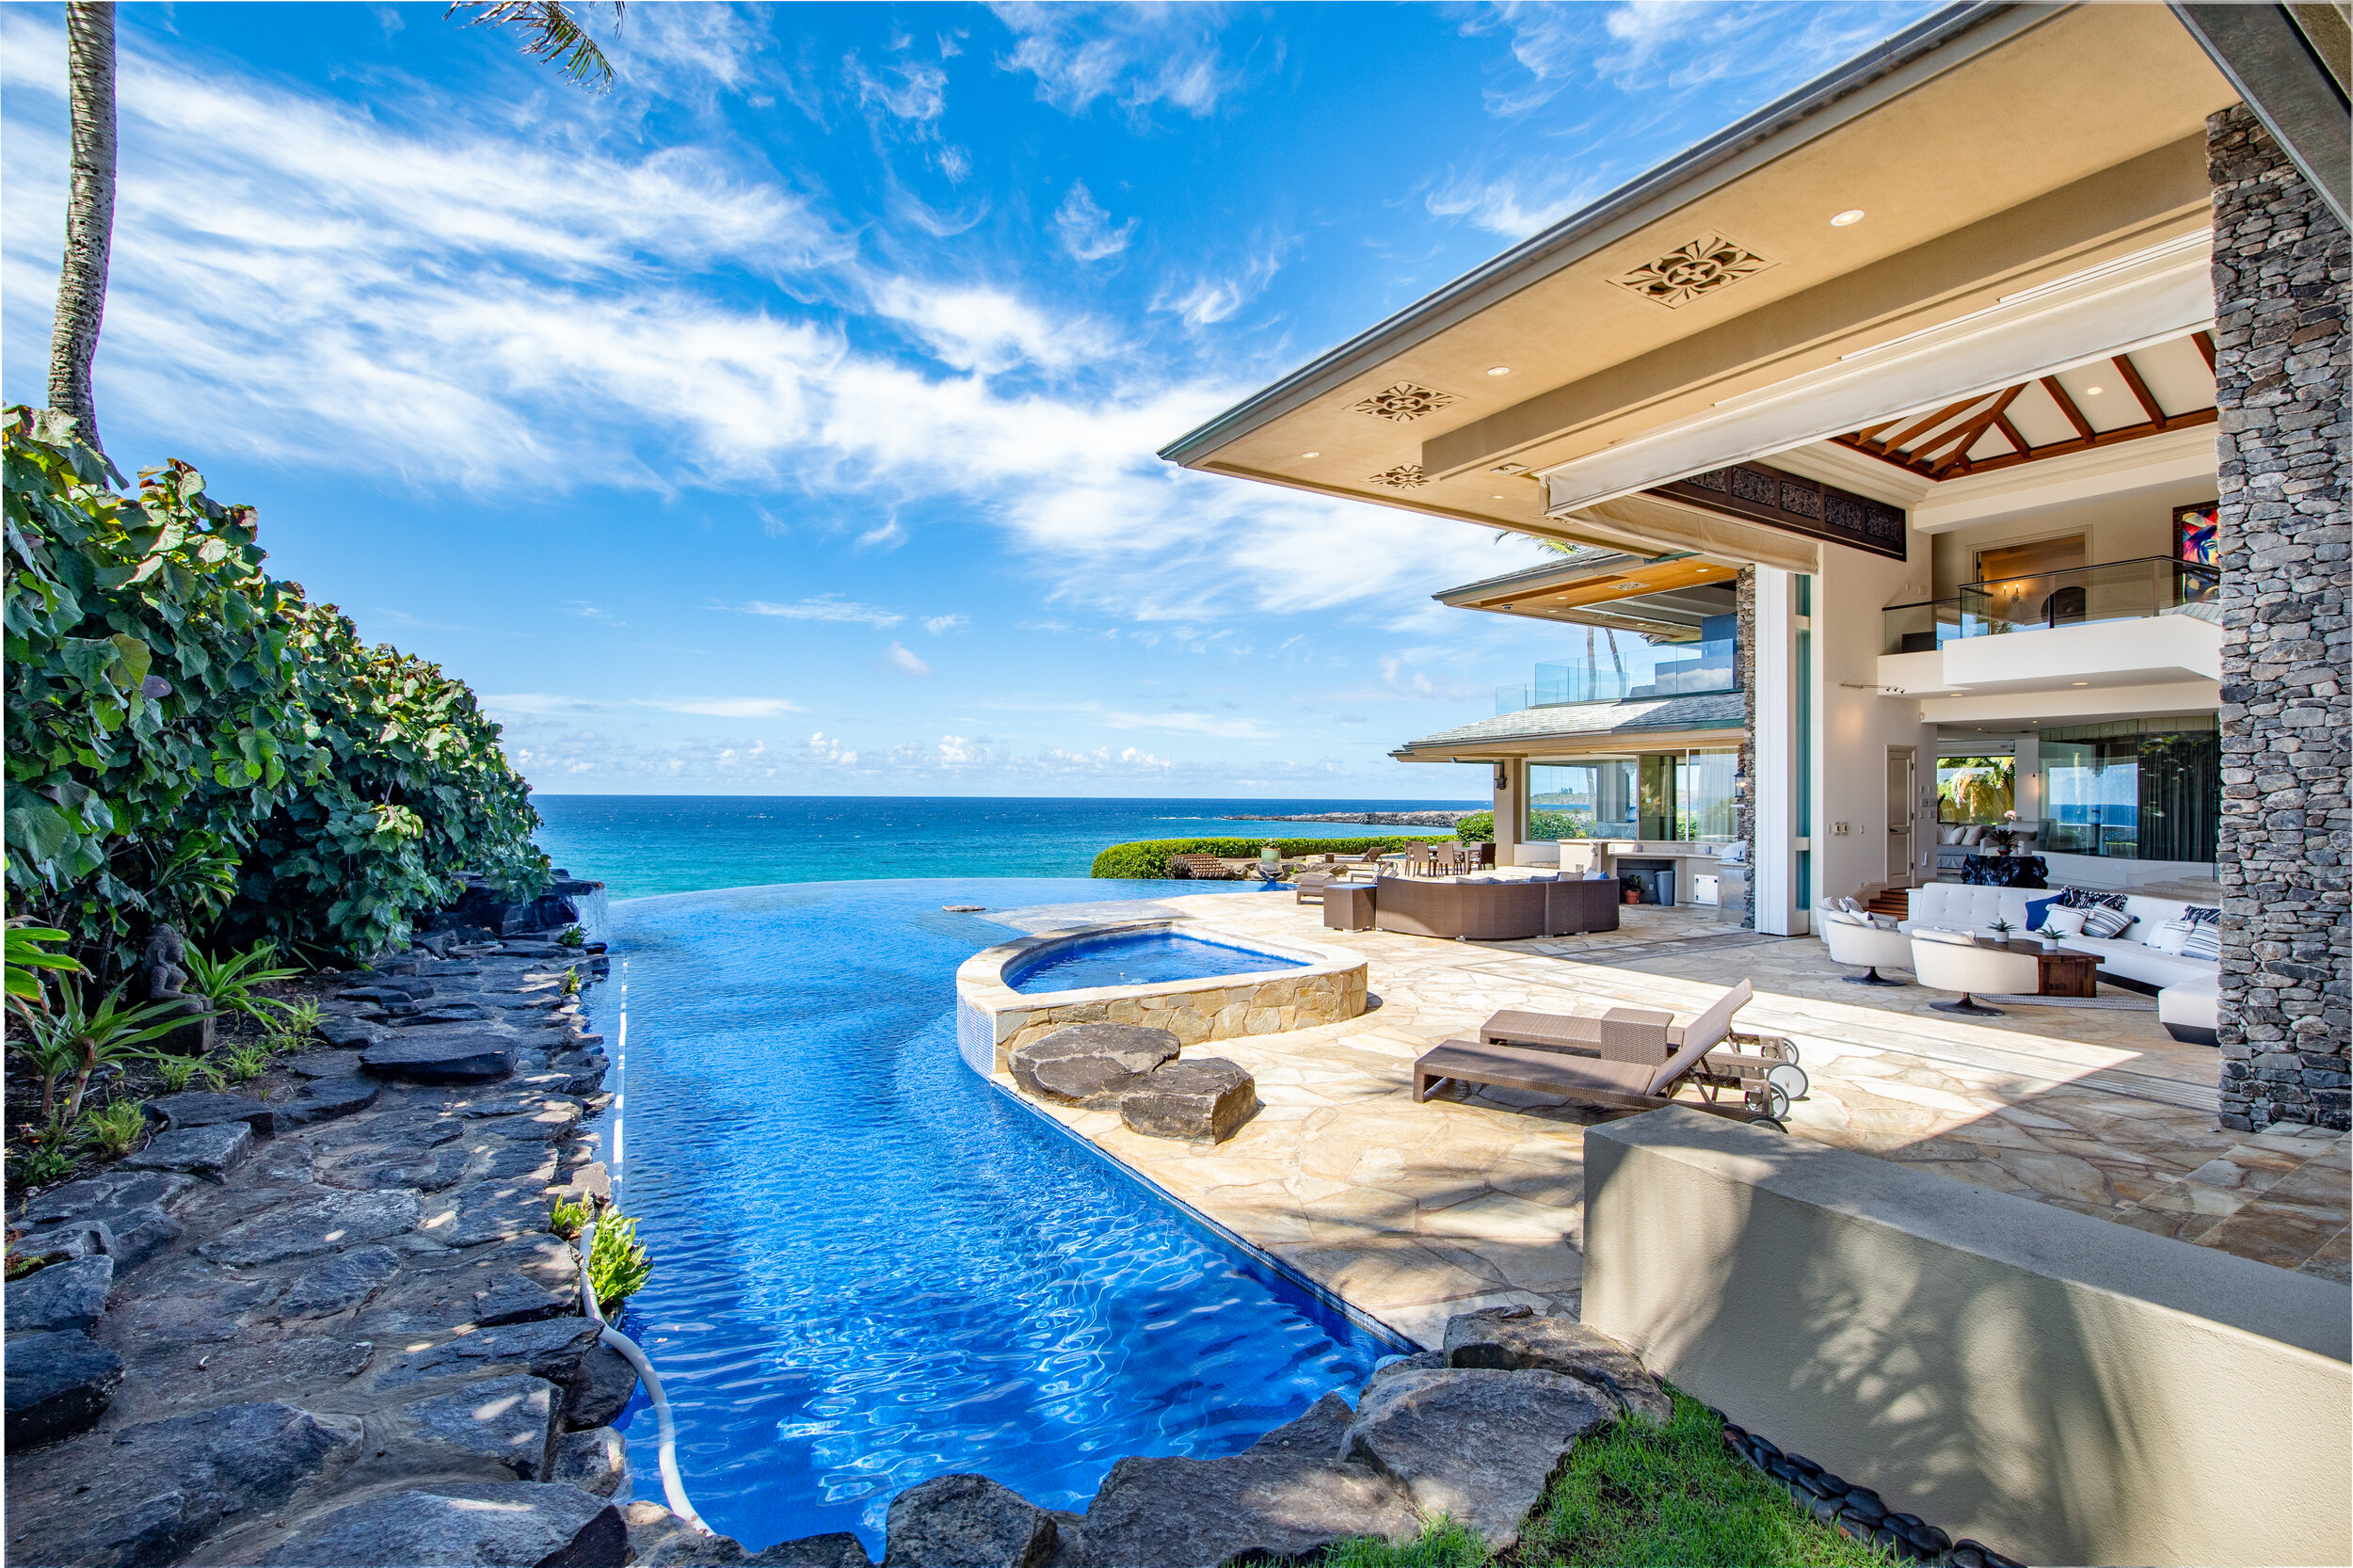 Did Tiger Woods Own A House In Hawaii?